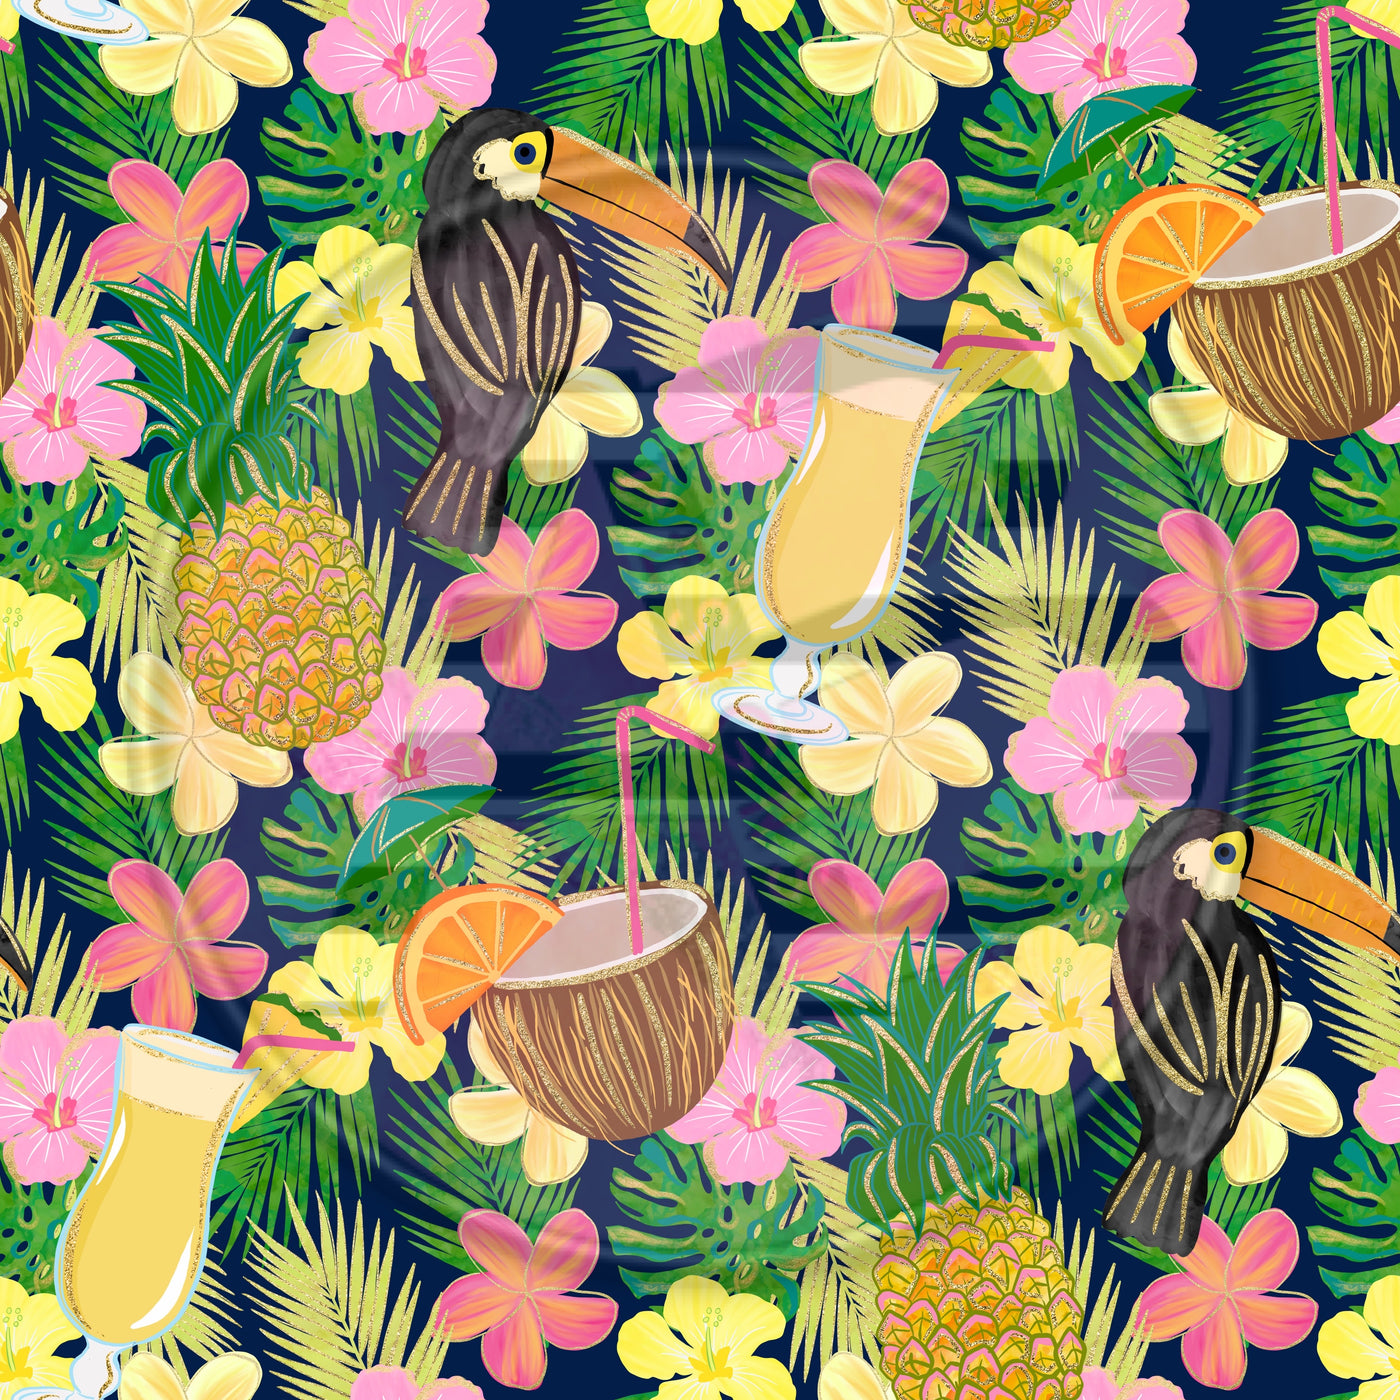 Adhesive Patterned Vinyl - Tropical 924